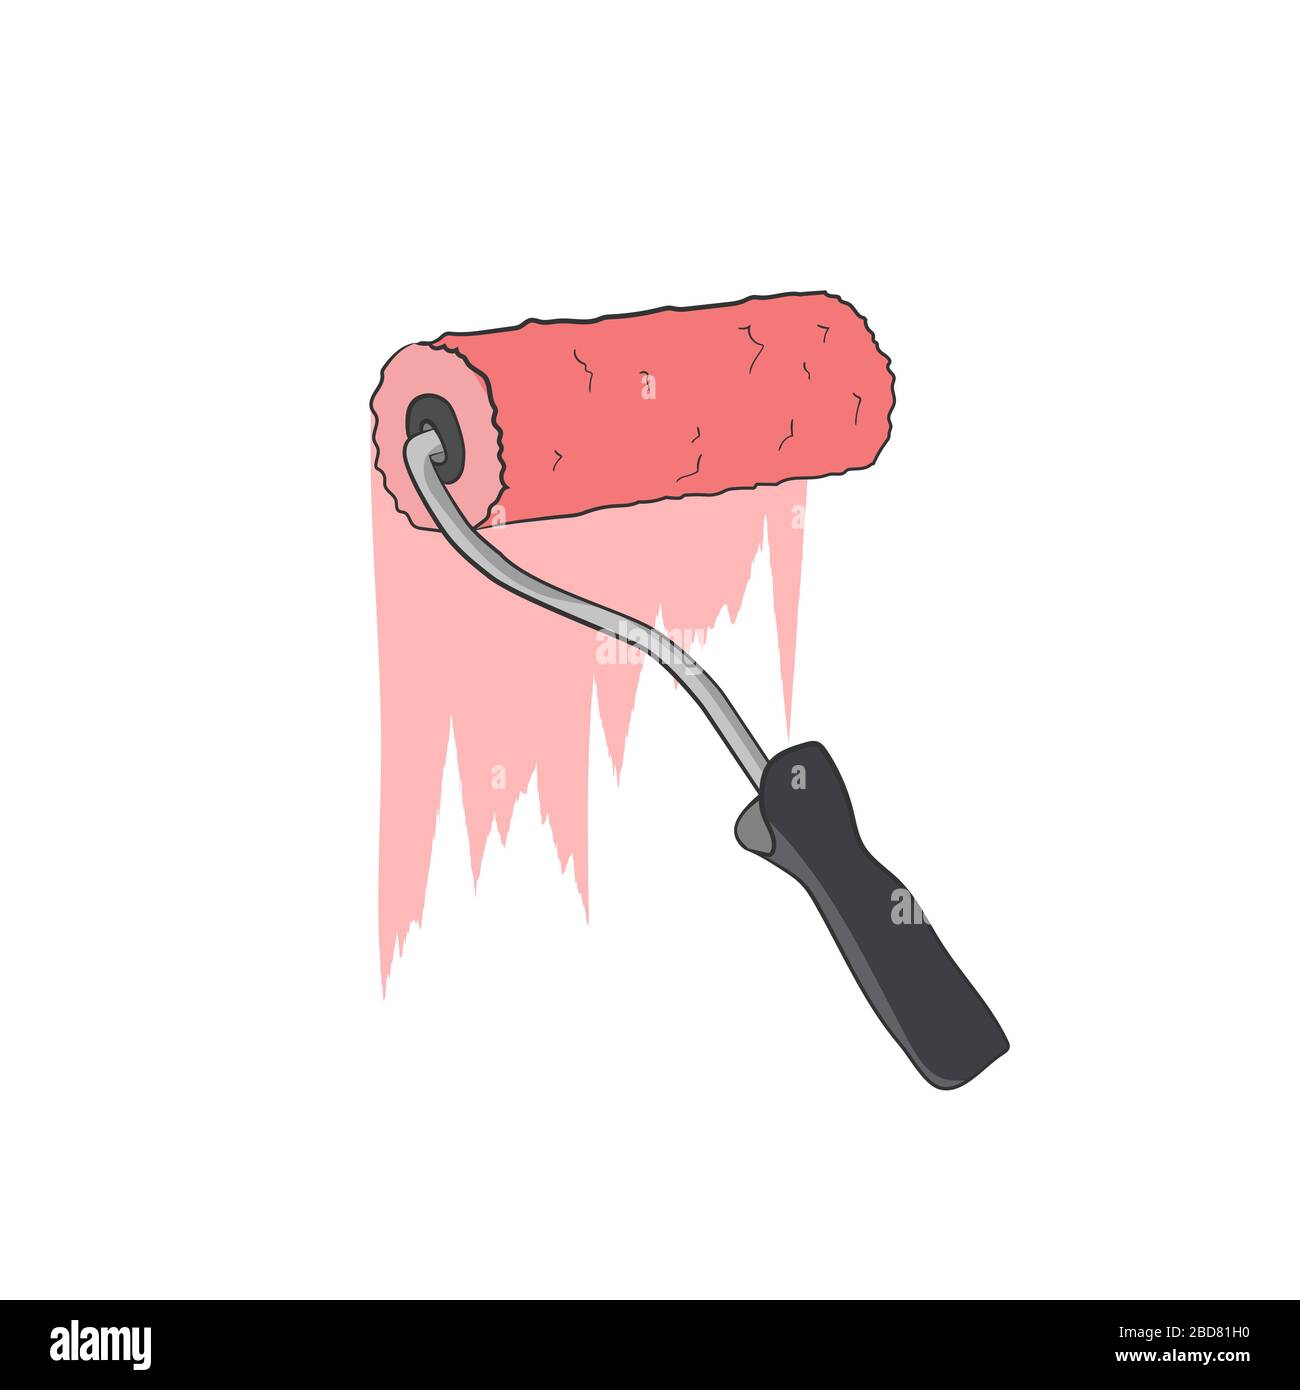 Paint roller sketch construction tool black Vector Image